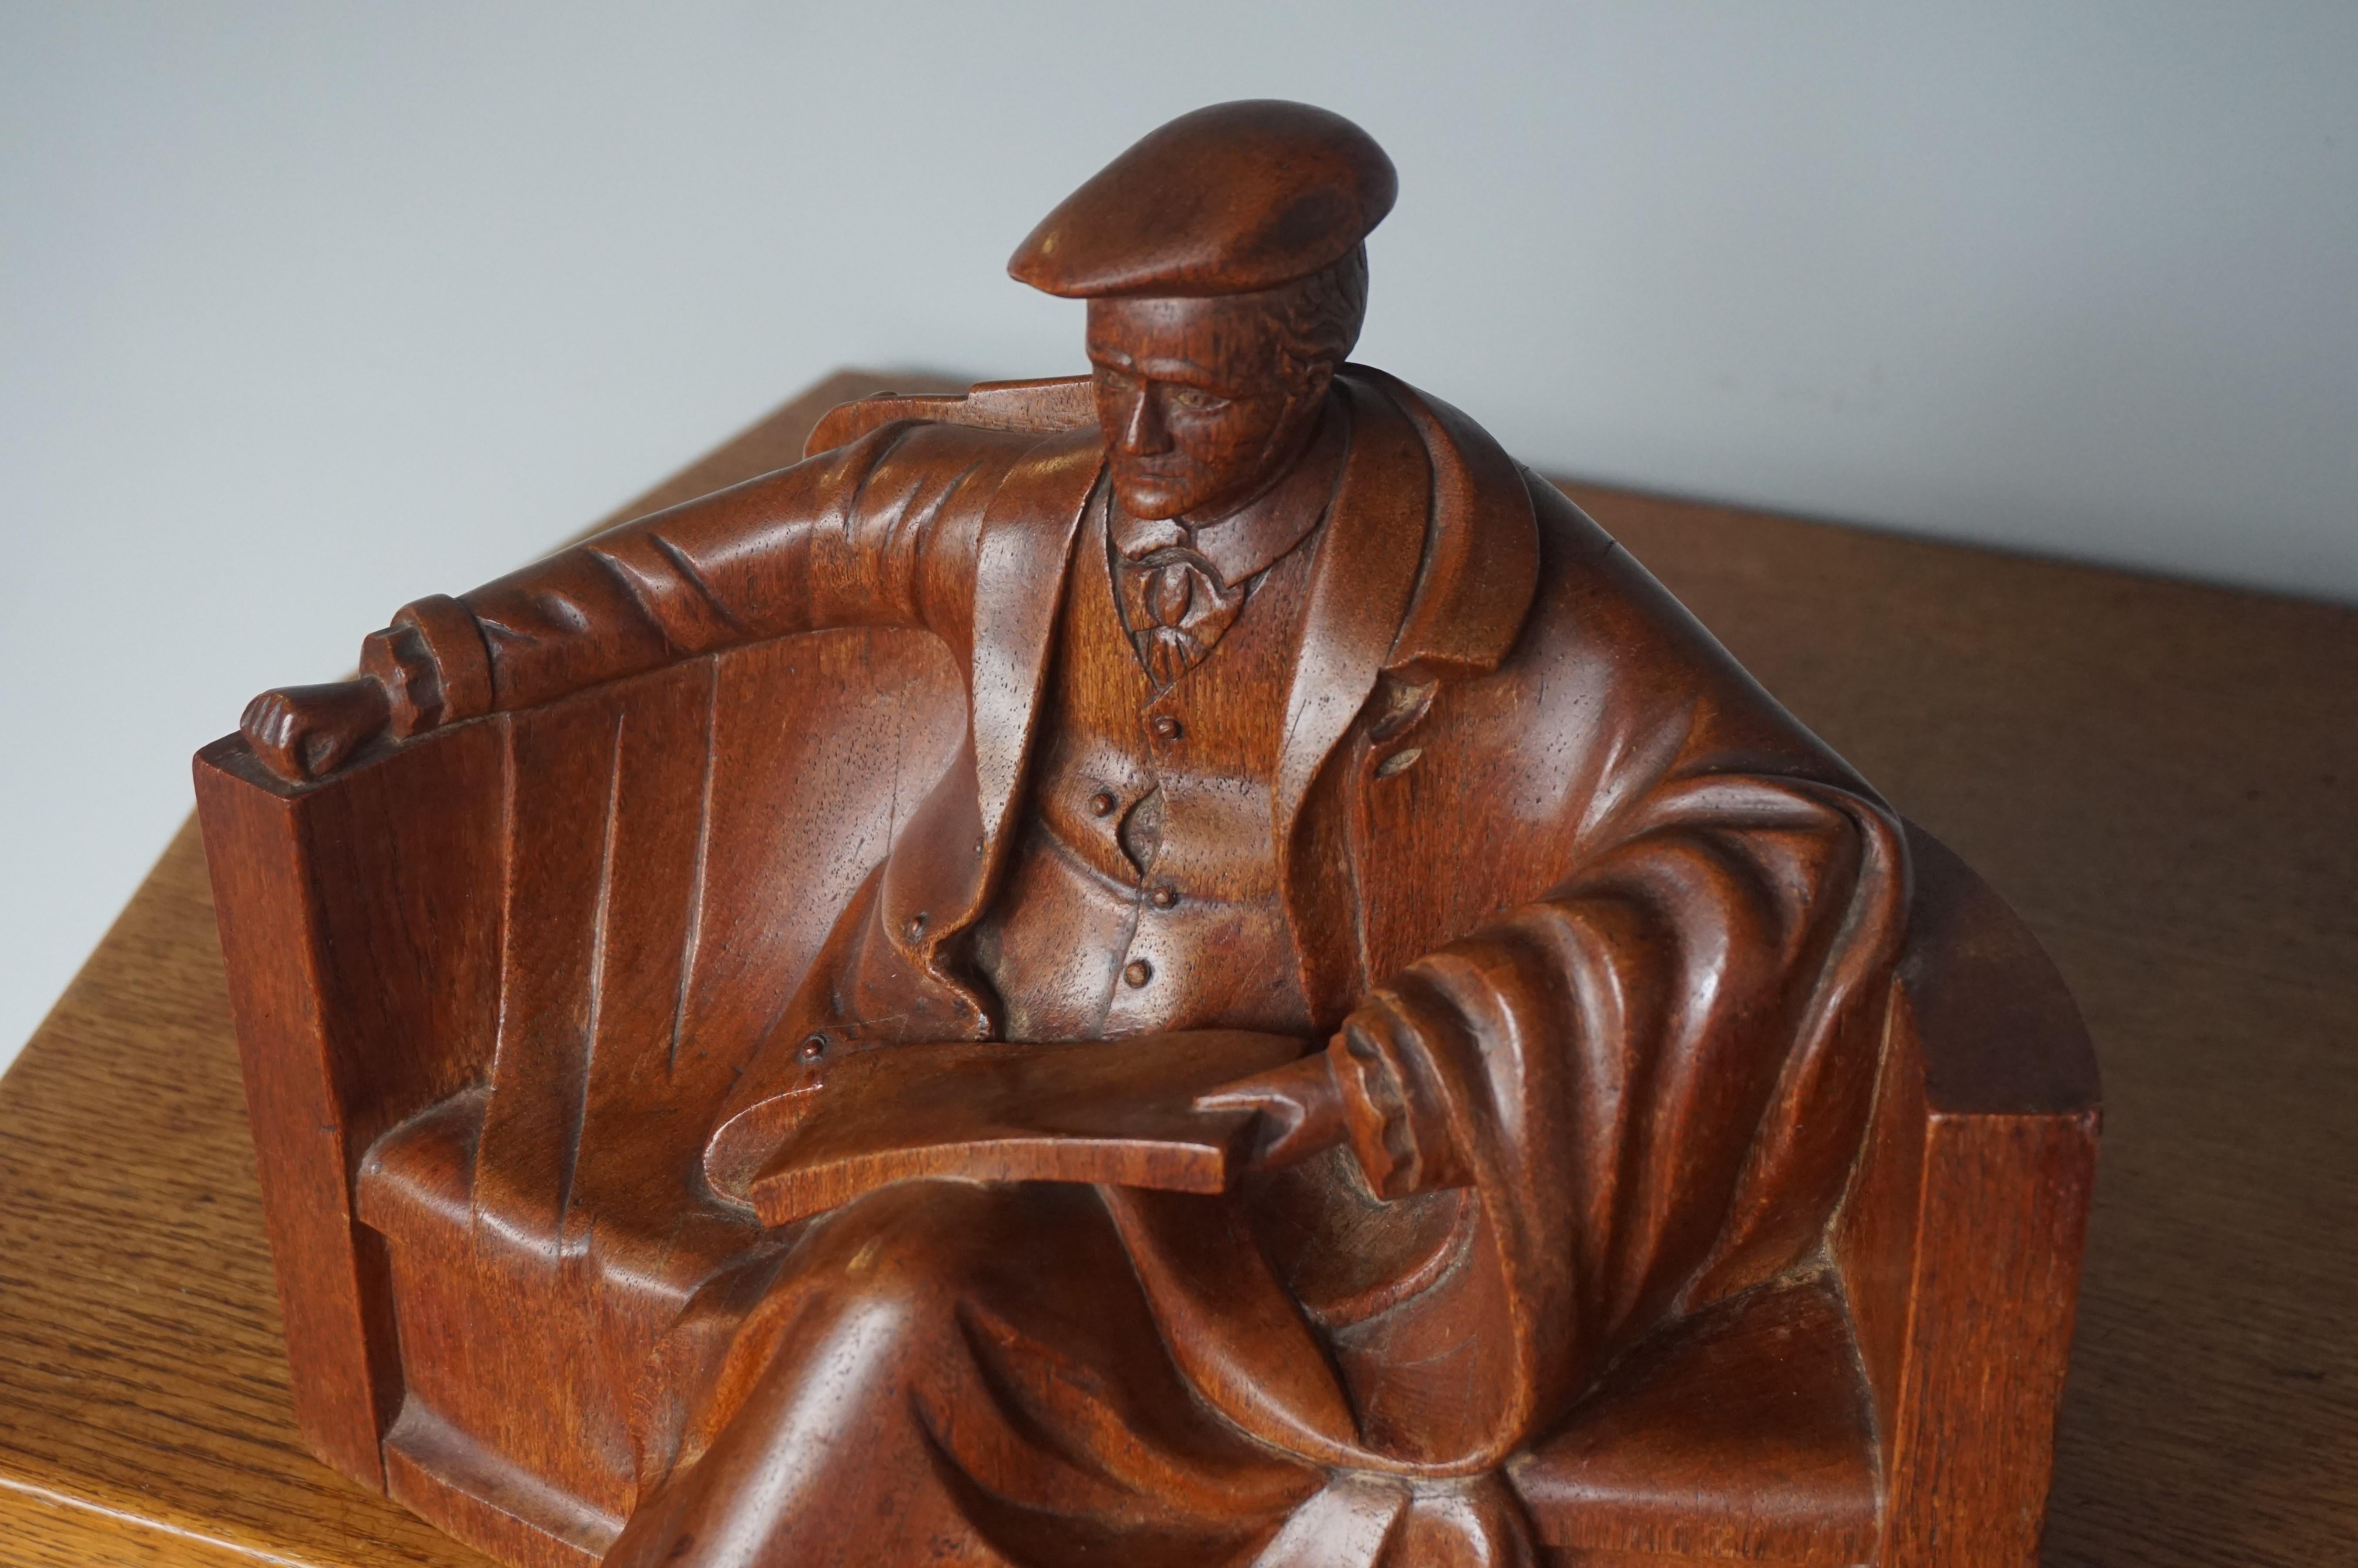 Unique & Stylish Sculpture of a Seated Scholar / Academic Made of Solid Teakwood 3